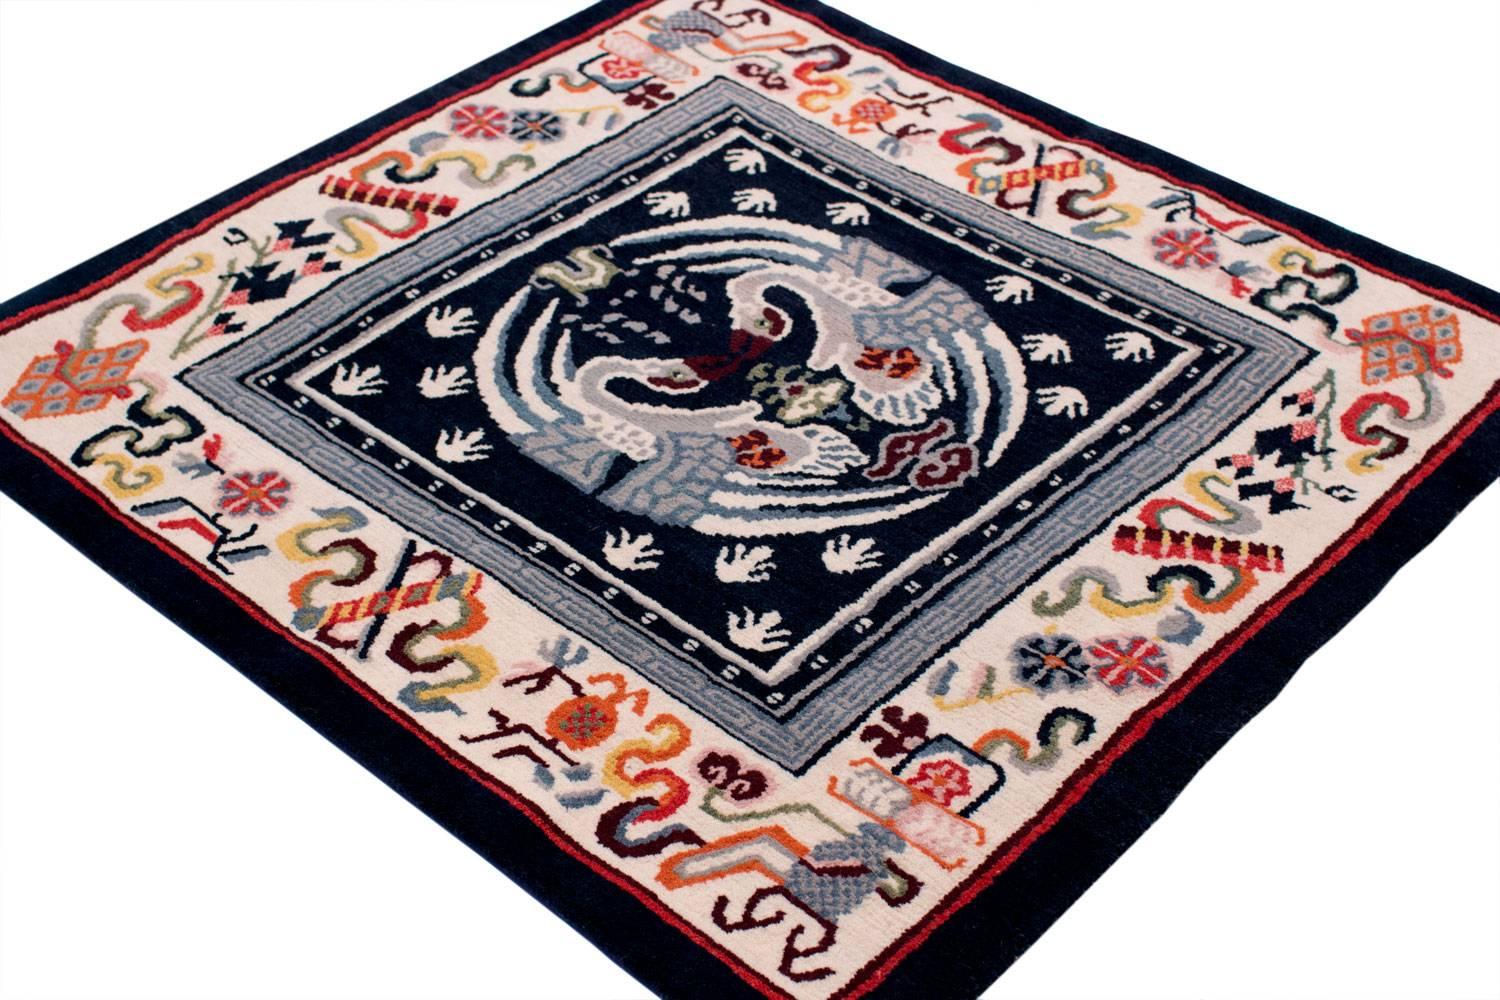 This spectacular reproduction of a small antique Tibetan mat was made with 100% vegetable dyes made using authentic Tibetan weaving techniques. 100% Himalayan wool. In beautiful blue color scheme with multicolored border.